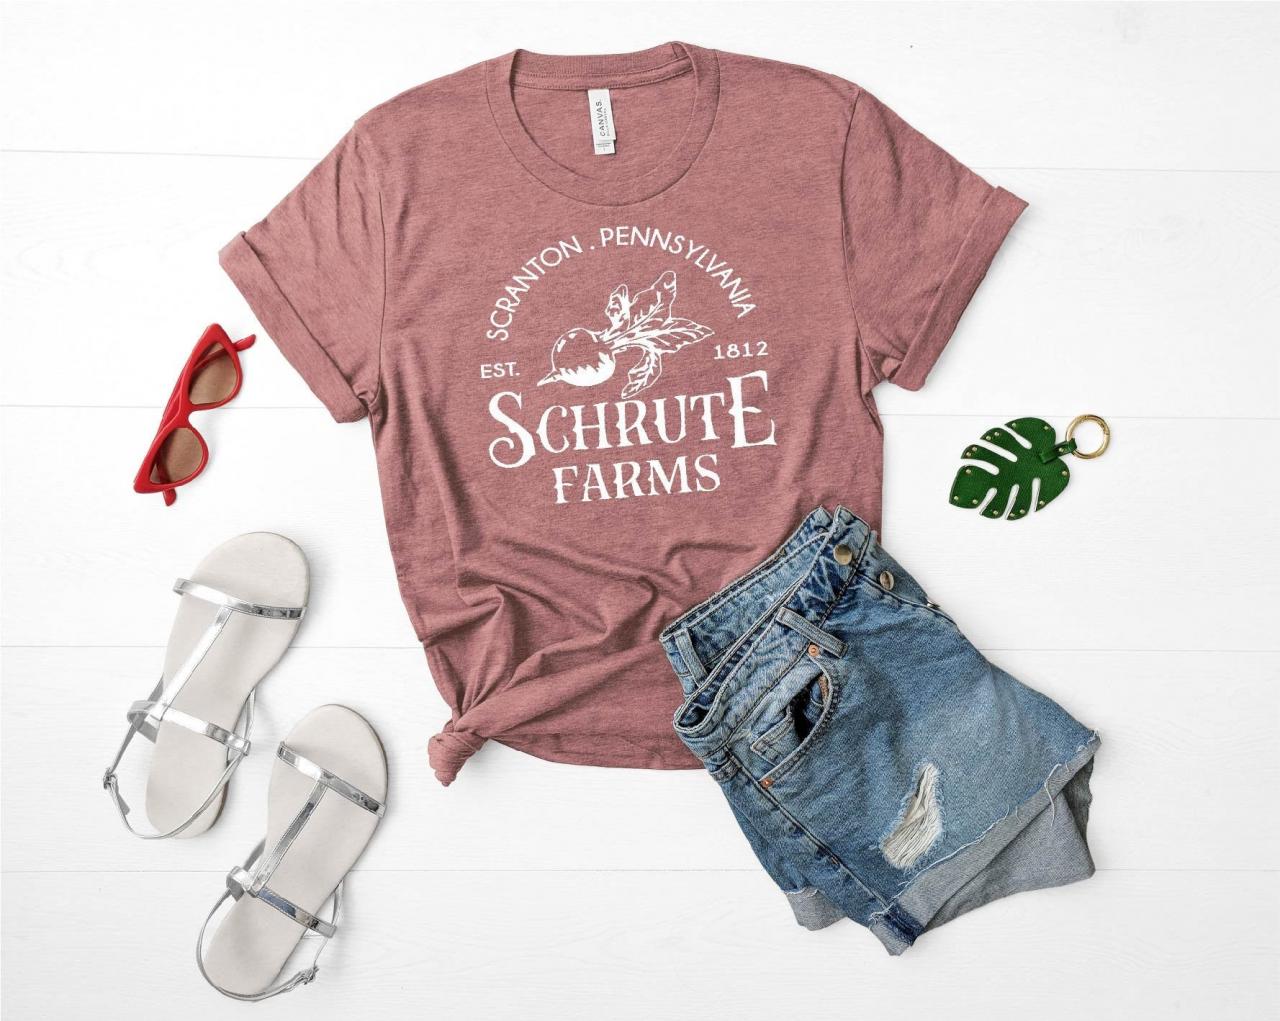 Schrute Farms T-shirt - Funny The Office Unisex Tee Shirt - Dwight Schrute Beet Farm - Tv Quotes Shirt - Funny Tv Shirts - Unisex T Shirt